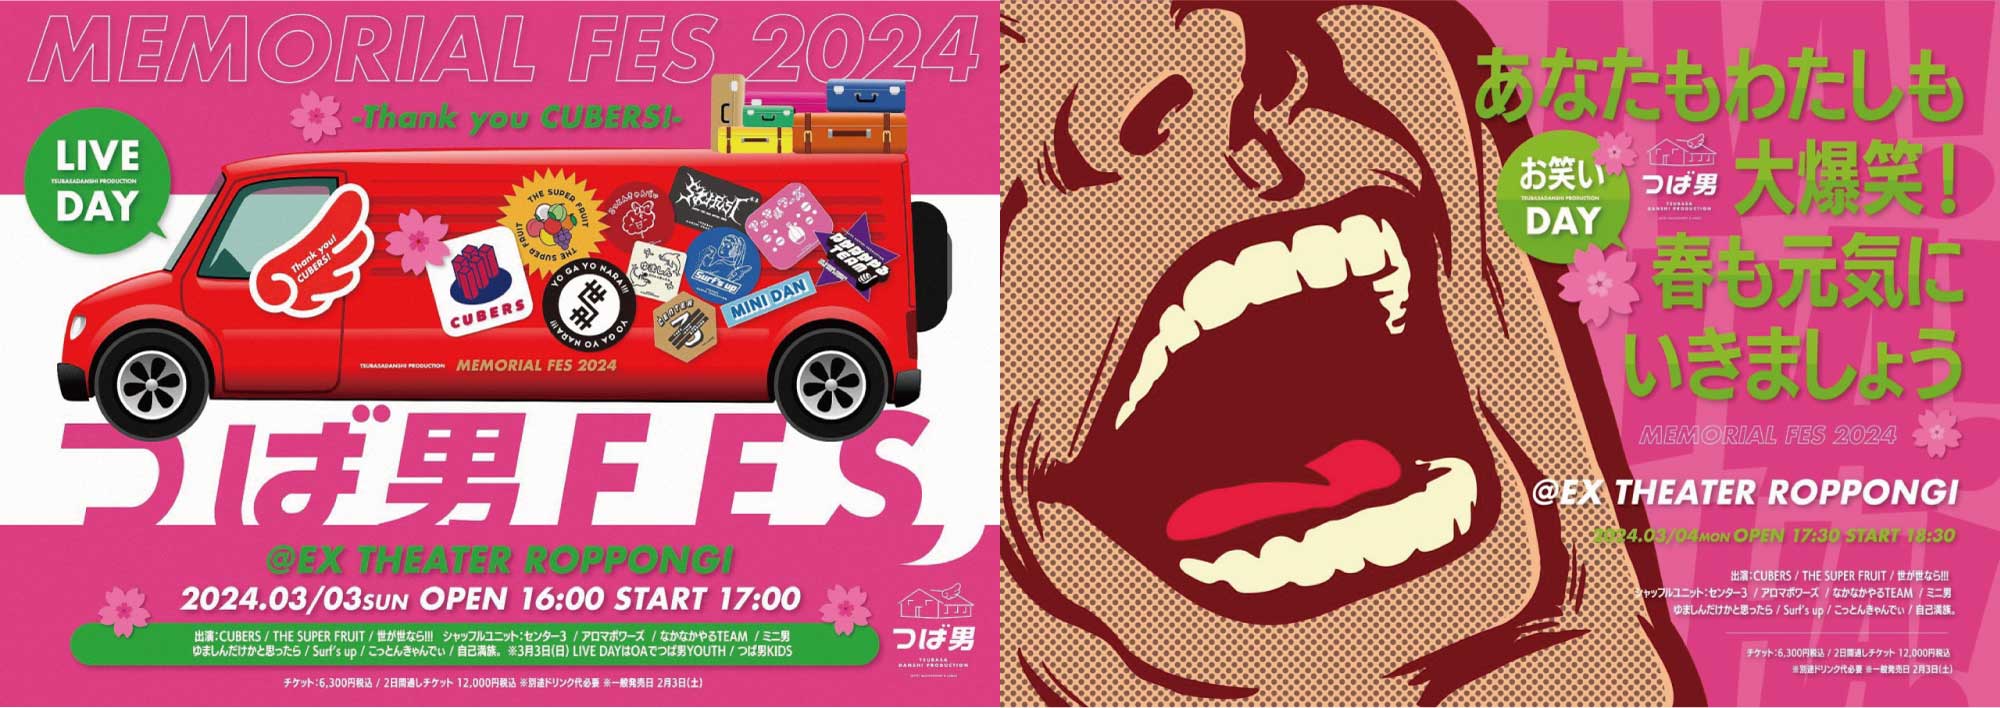 【NEWS”1″】つば男MEMORIAL FES 2024にて「CUBERS LAST LIVE – Final scene and Life goes on – 」「THE SUPER FRUIT 2nd ONEMAN TOUR – Blue Fruits Tour2024 -」  「世が世なら!!! 人生敗者復活戦ツアー!!! – 裏・天下一武道会2024- 」手売りチケット販売＆つば男総勢18名お見送り会実施決定！(2024.02.28更新)